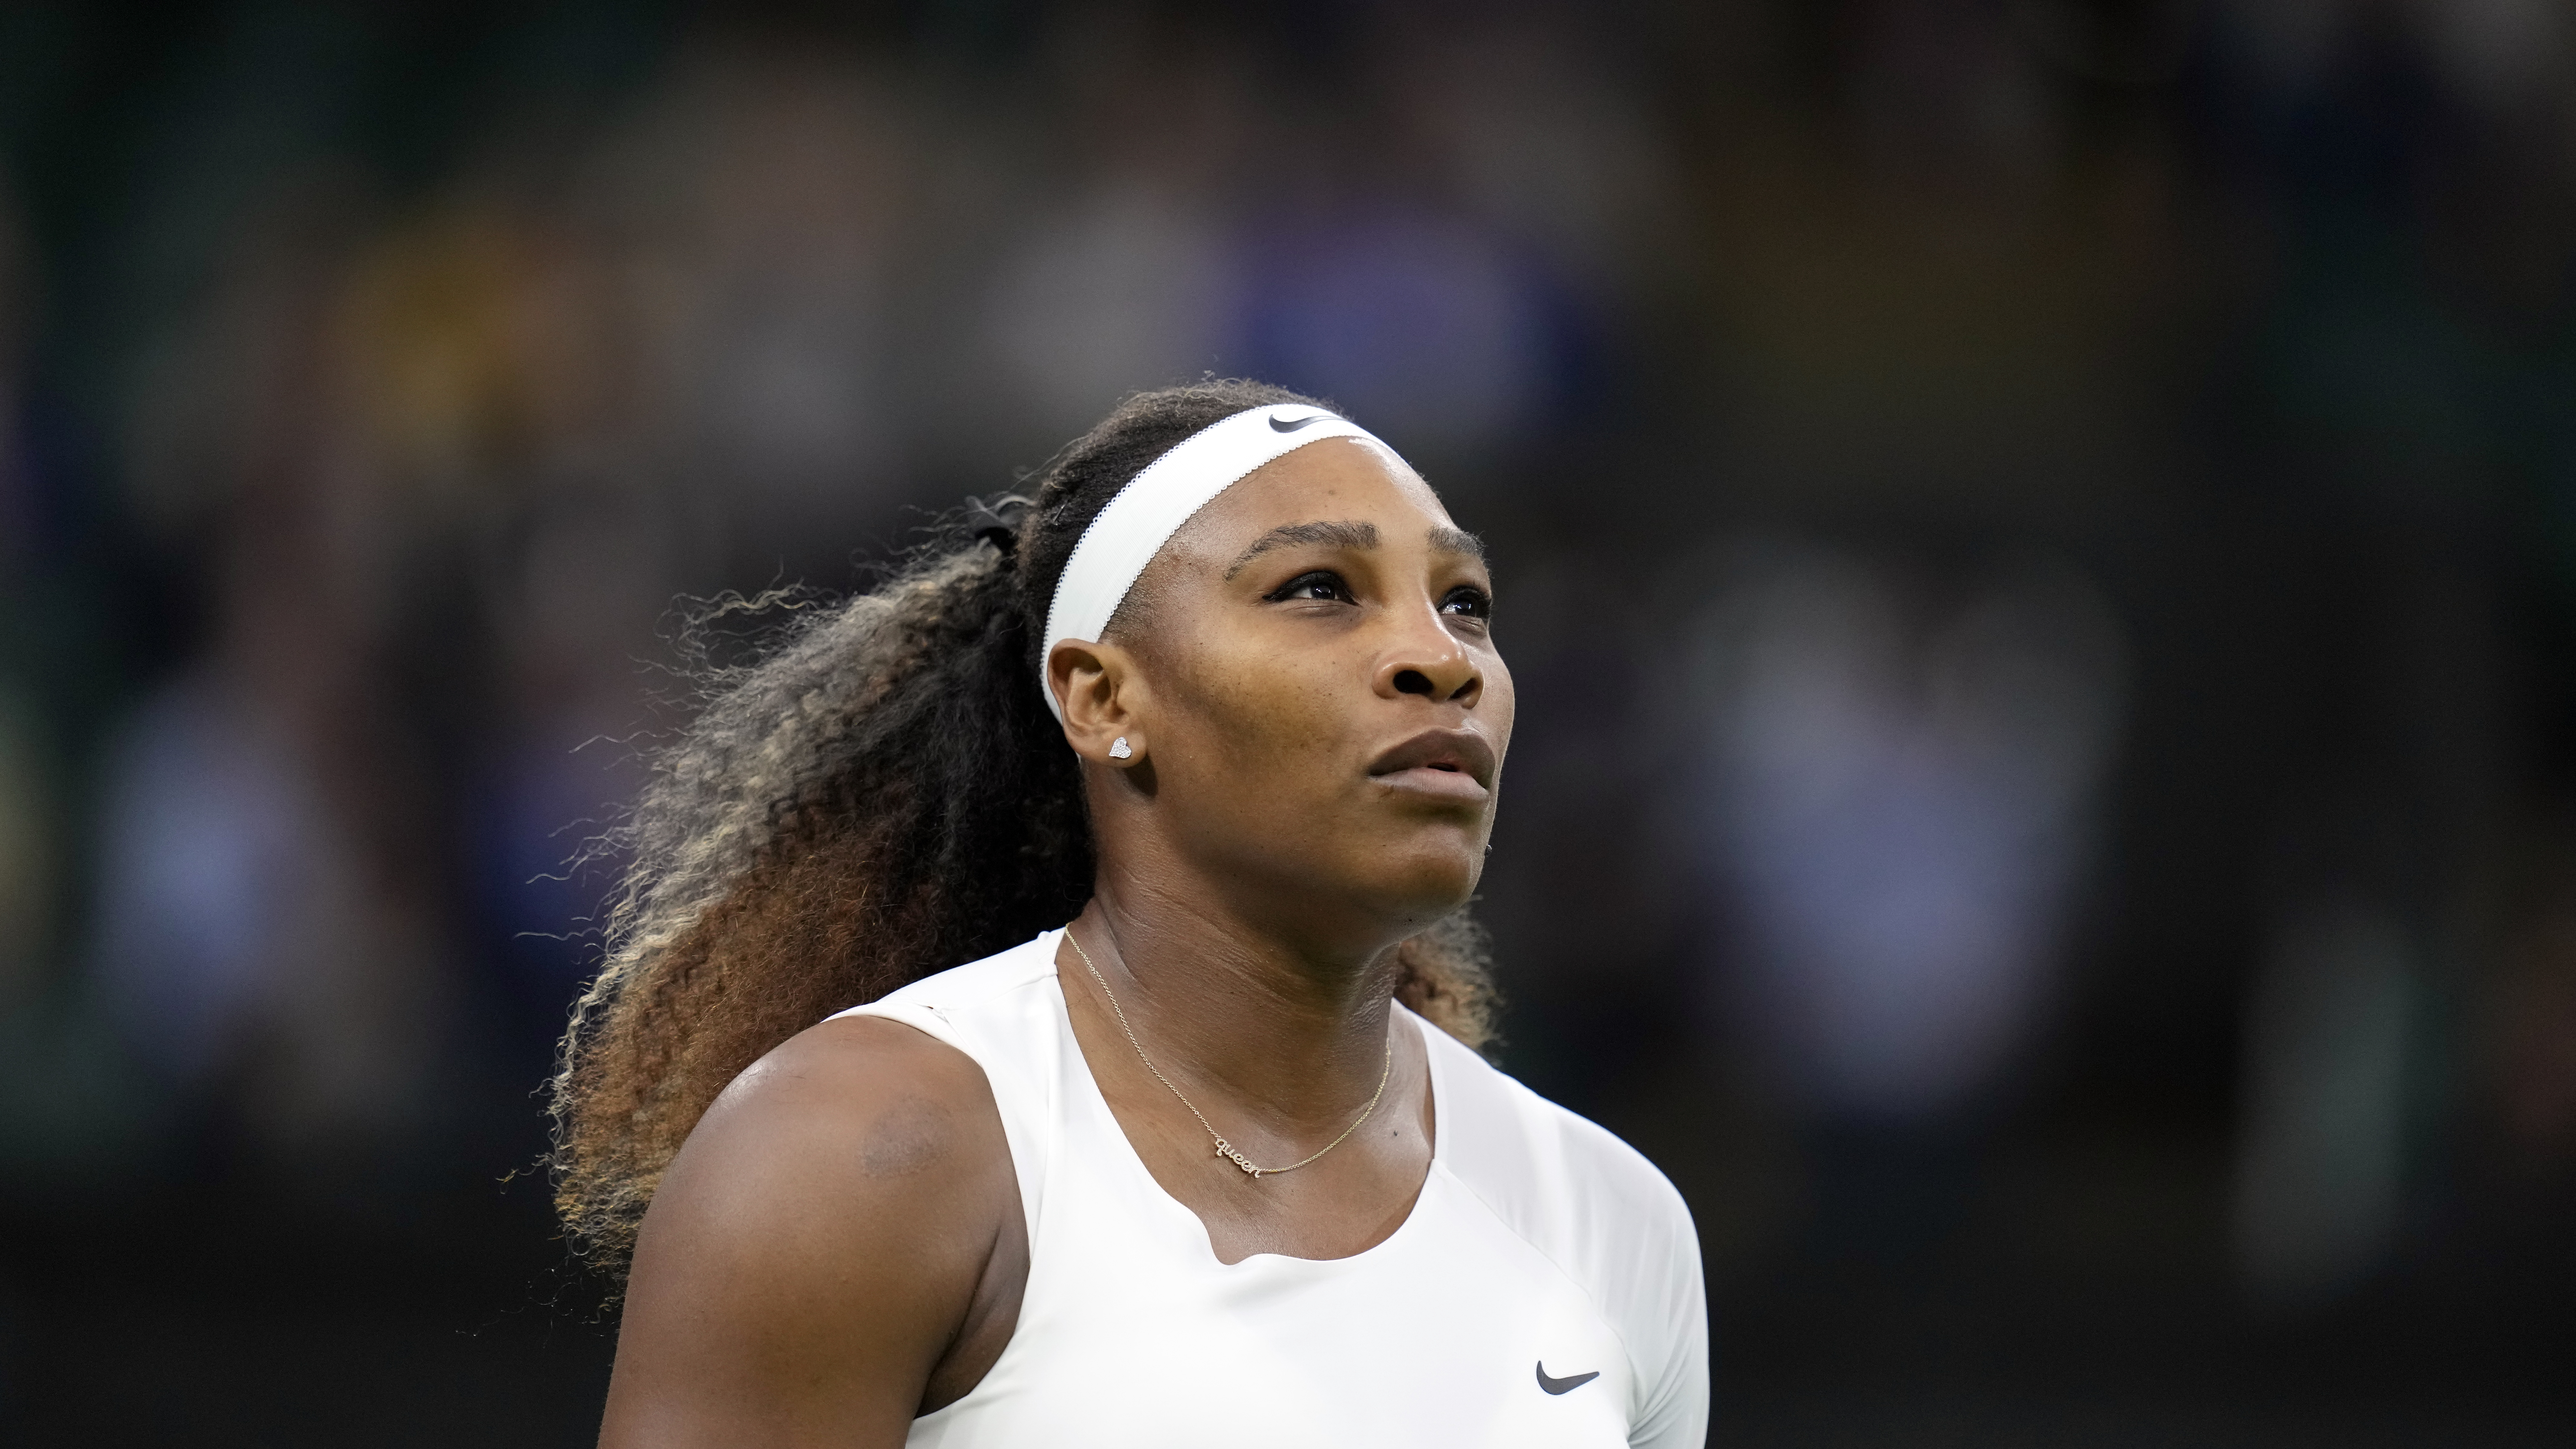 Serena Williams added herself to the list of big-name withdrawals from the U.S. Open.